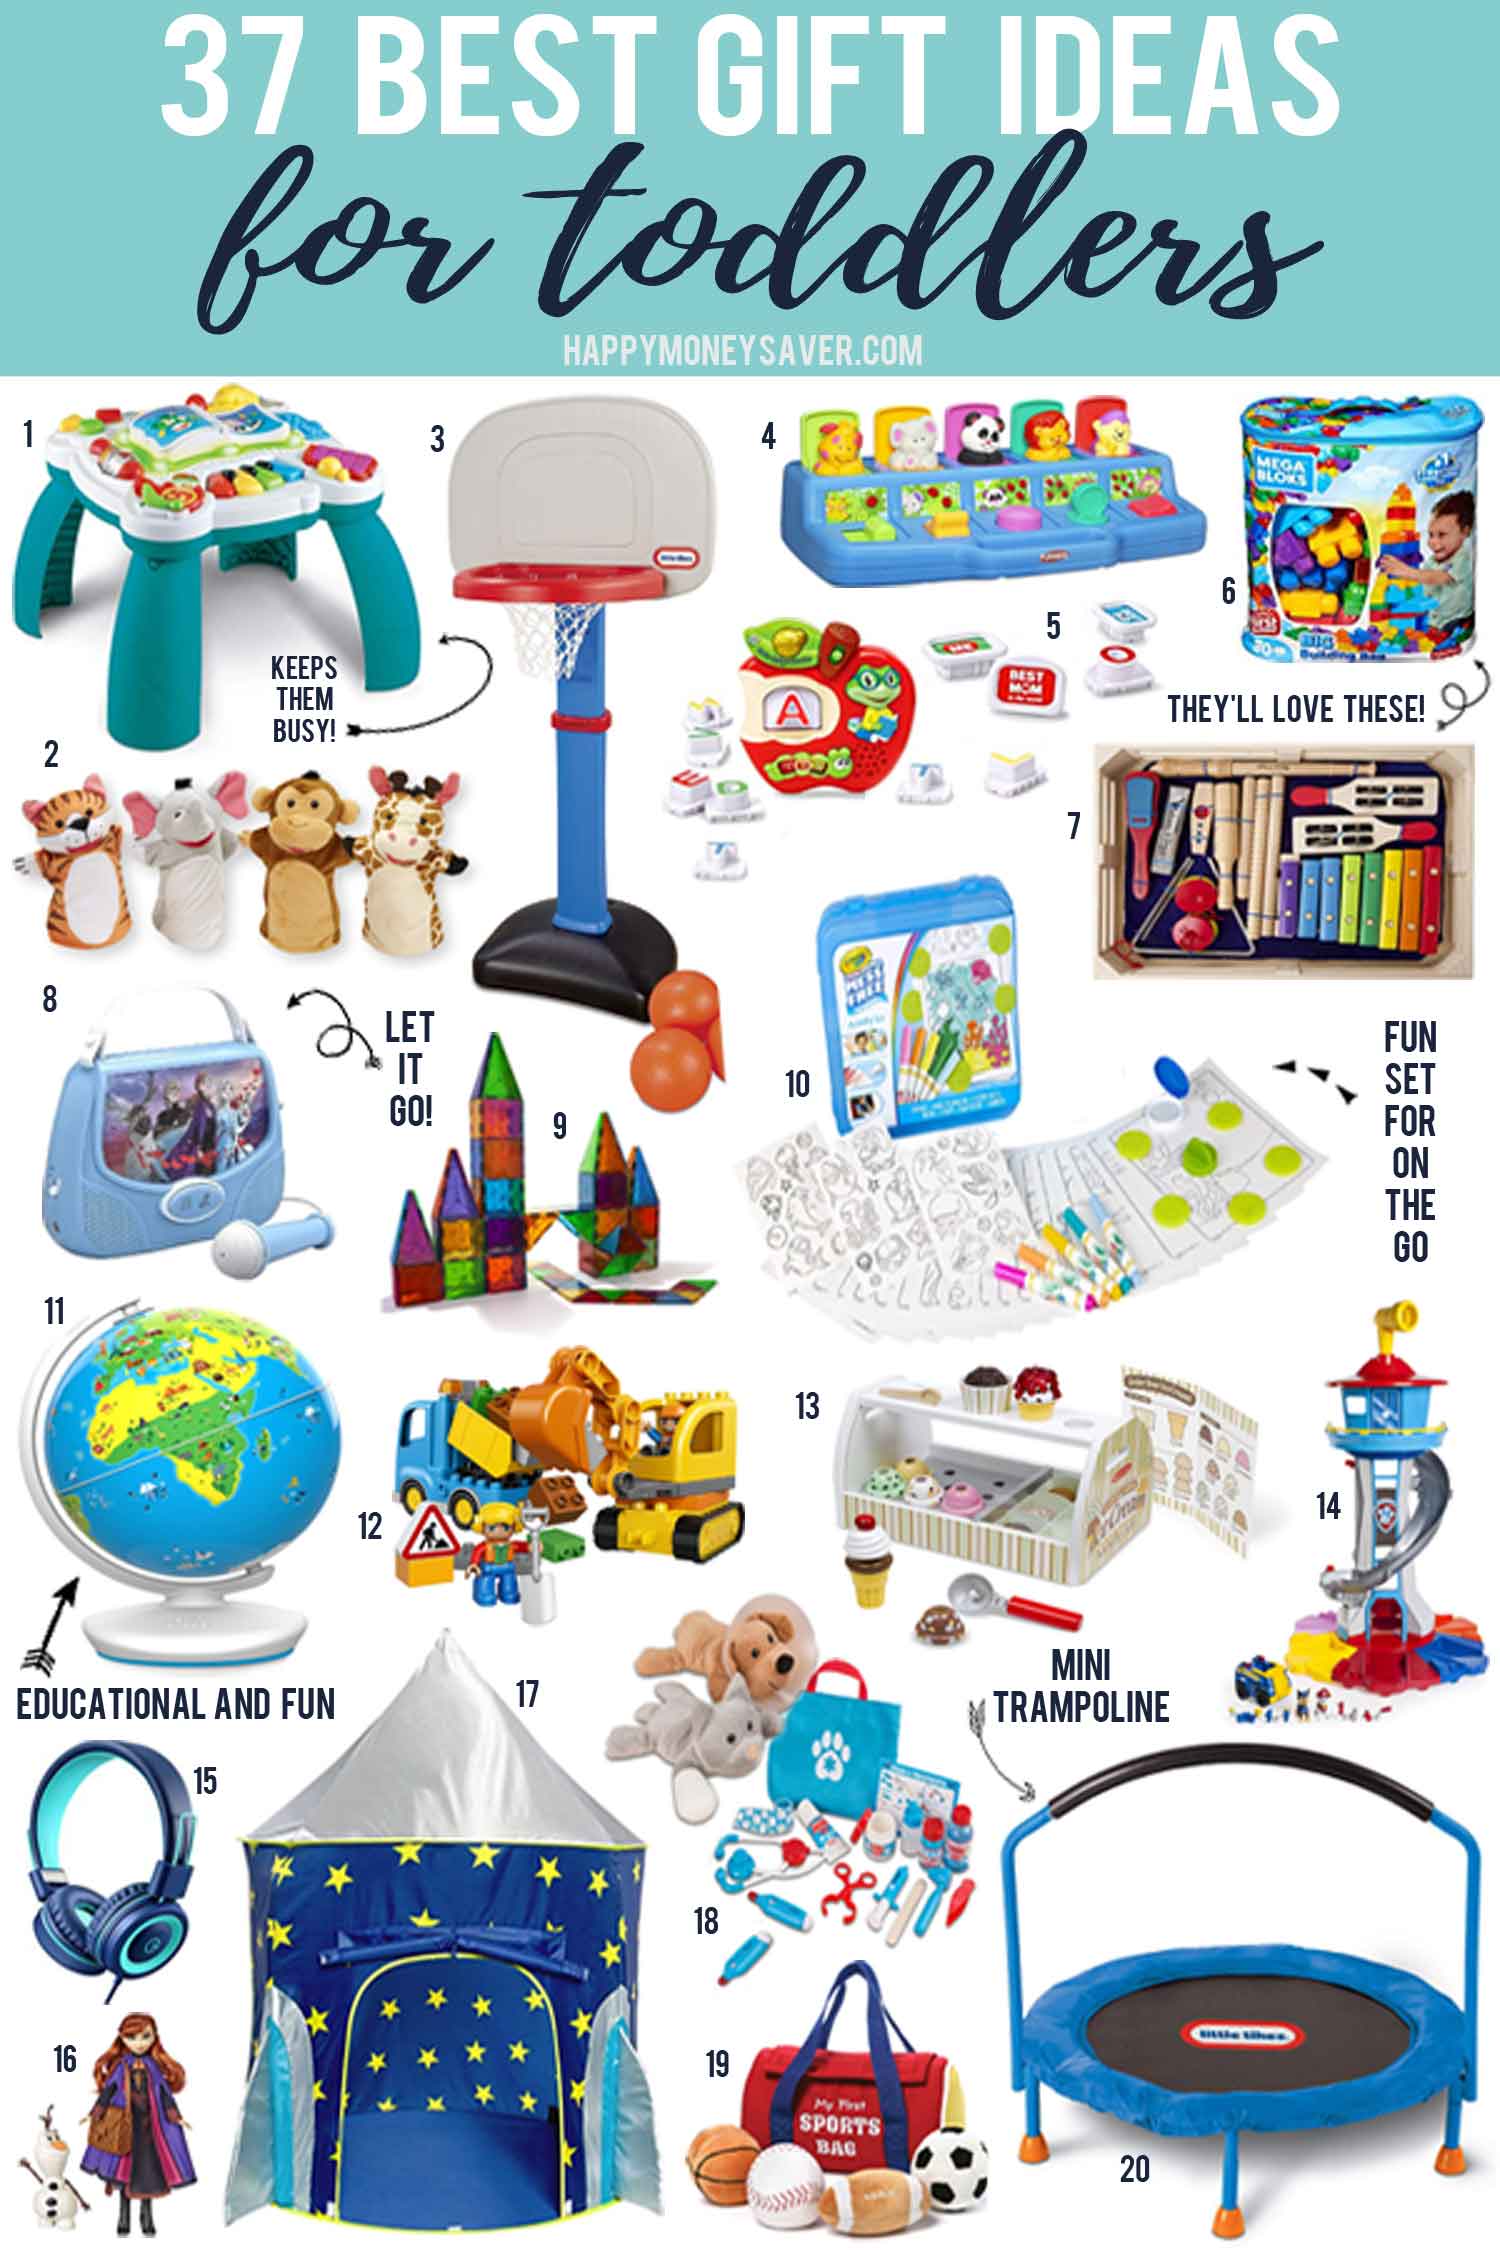 37 Best Gift Ideas for Toddlers with product images from happymoneysaver.com 